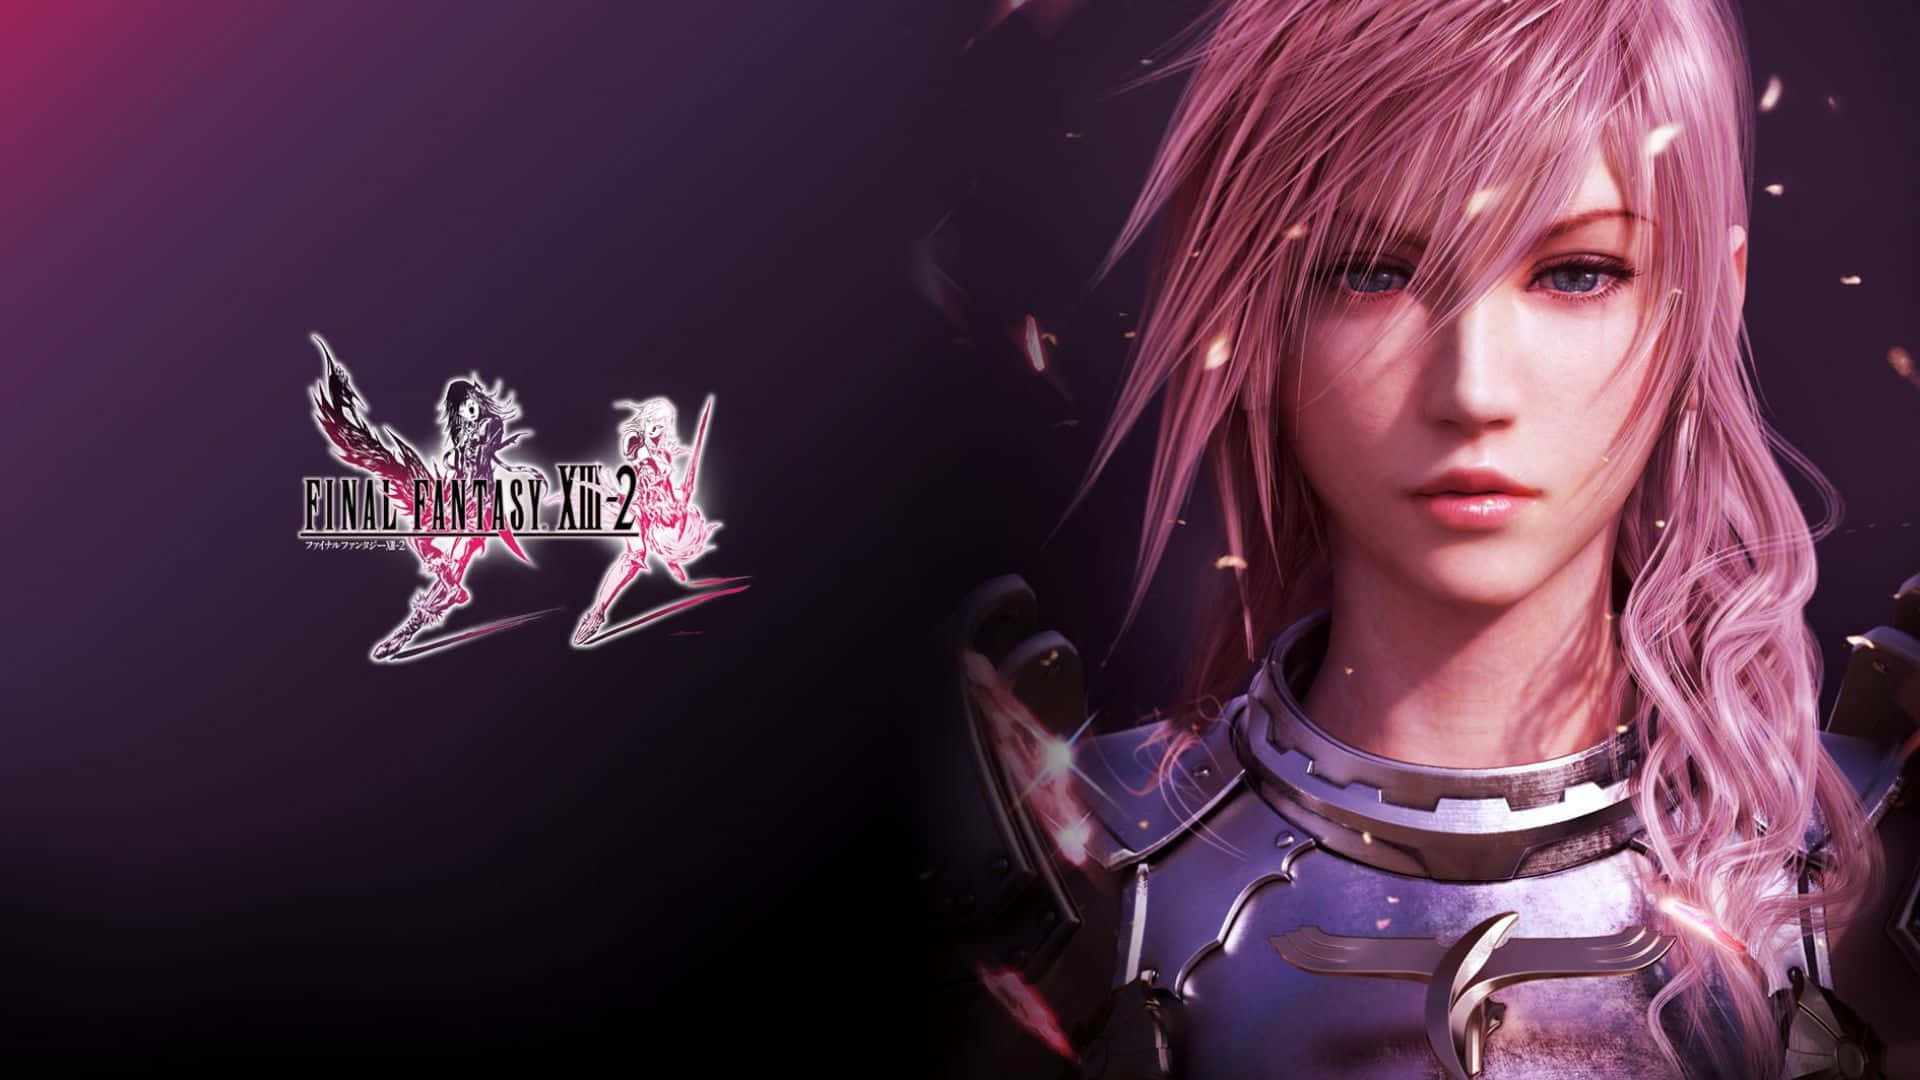 Final Fantasy Lightning Displaying Strength And Brilliance Wallpaper